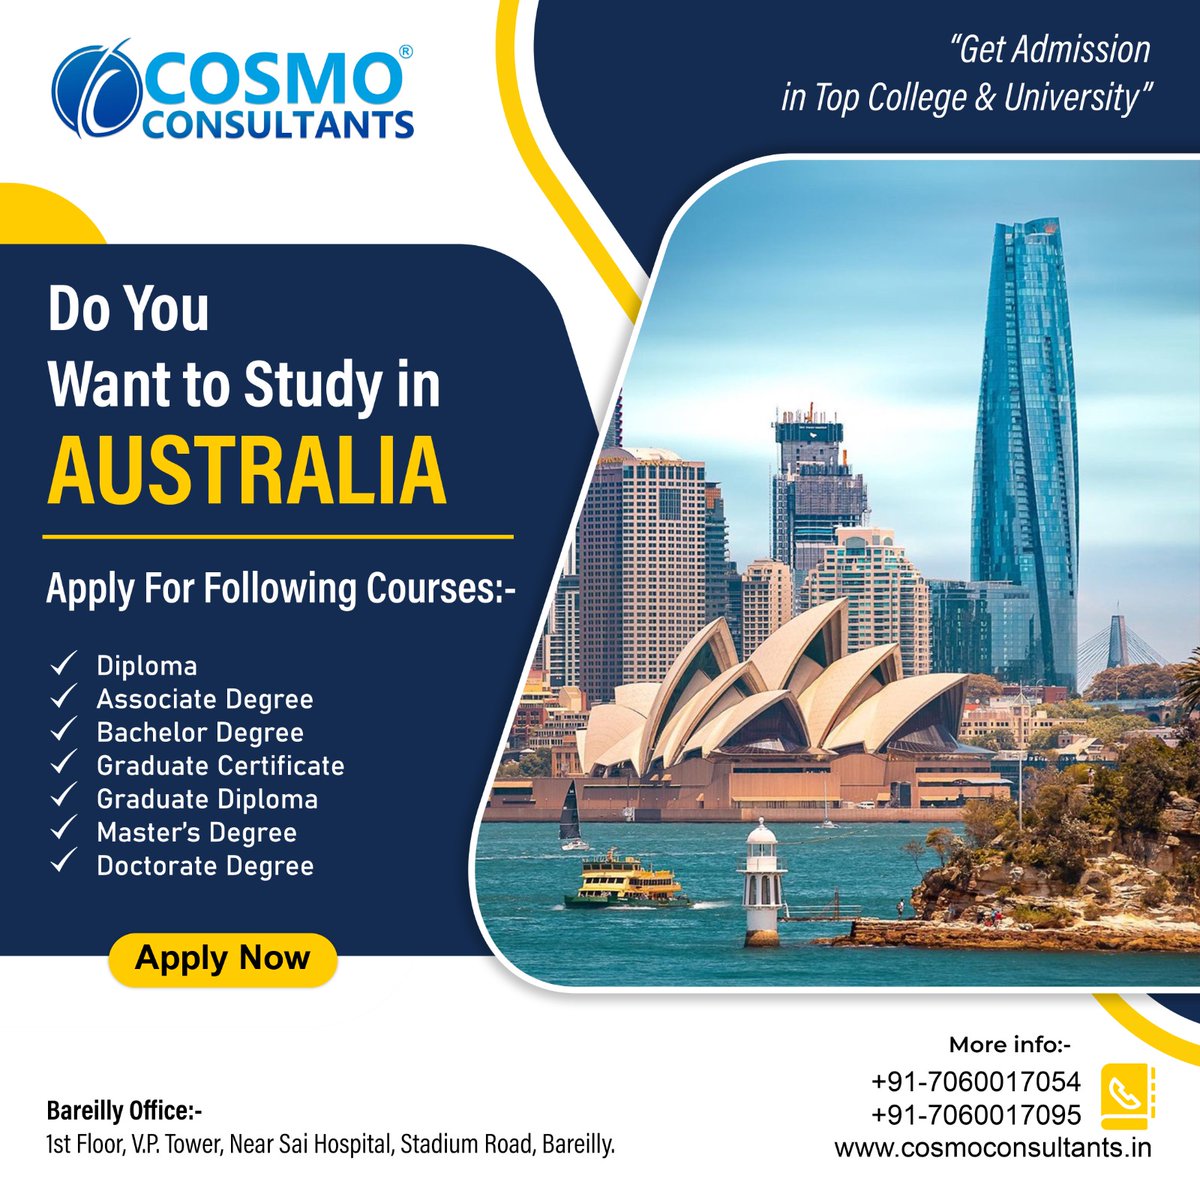 🌟 Dreaming of studying in Australia? 🇦🇺 Explore a wide range of academic opportunities from #Diploma to #Doctorate #Degree! 🎓✈️ Apply for the upcoming intake with #CosmoConsultants and unlock your path to success. More information: +91-7060017054, +91-7060017095. #Australia